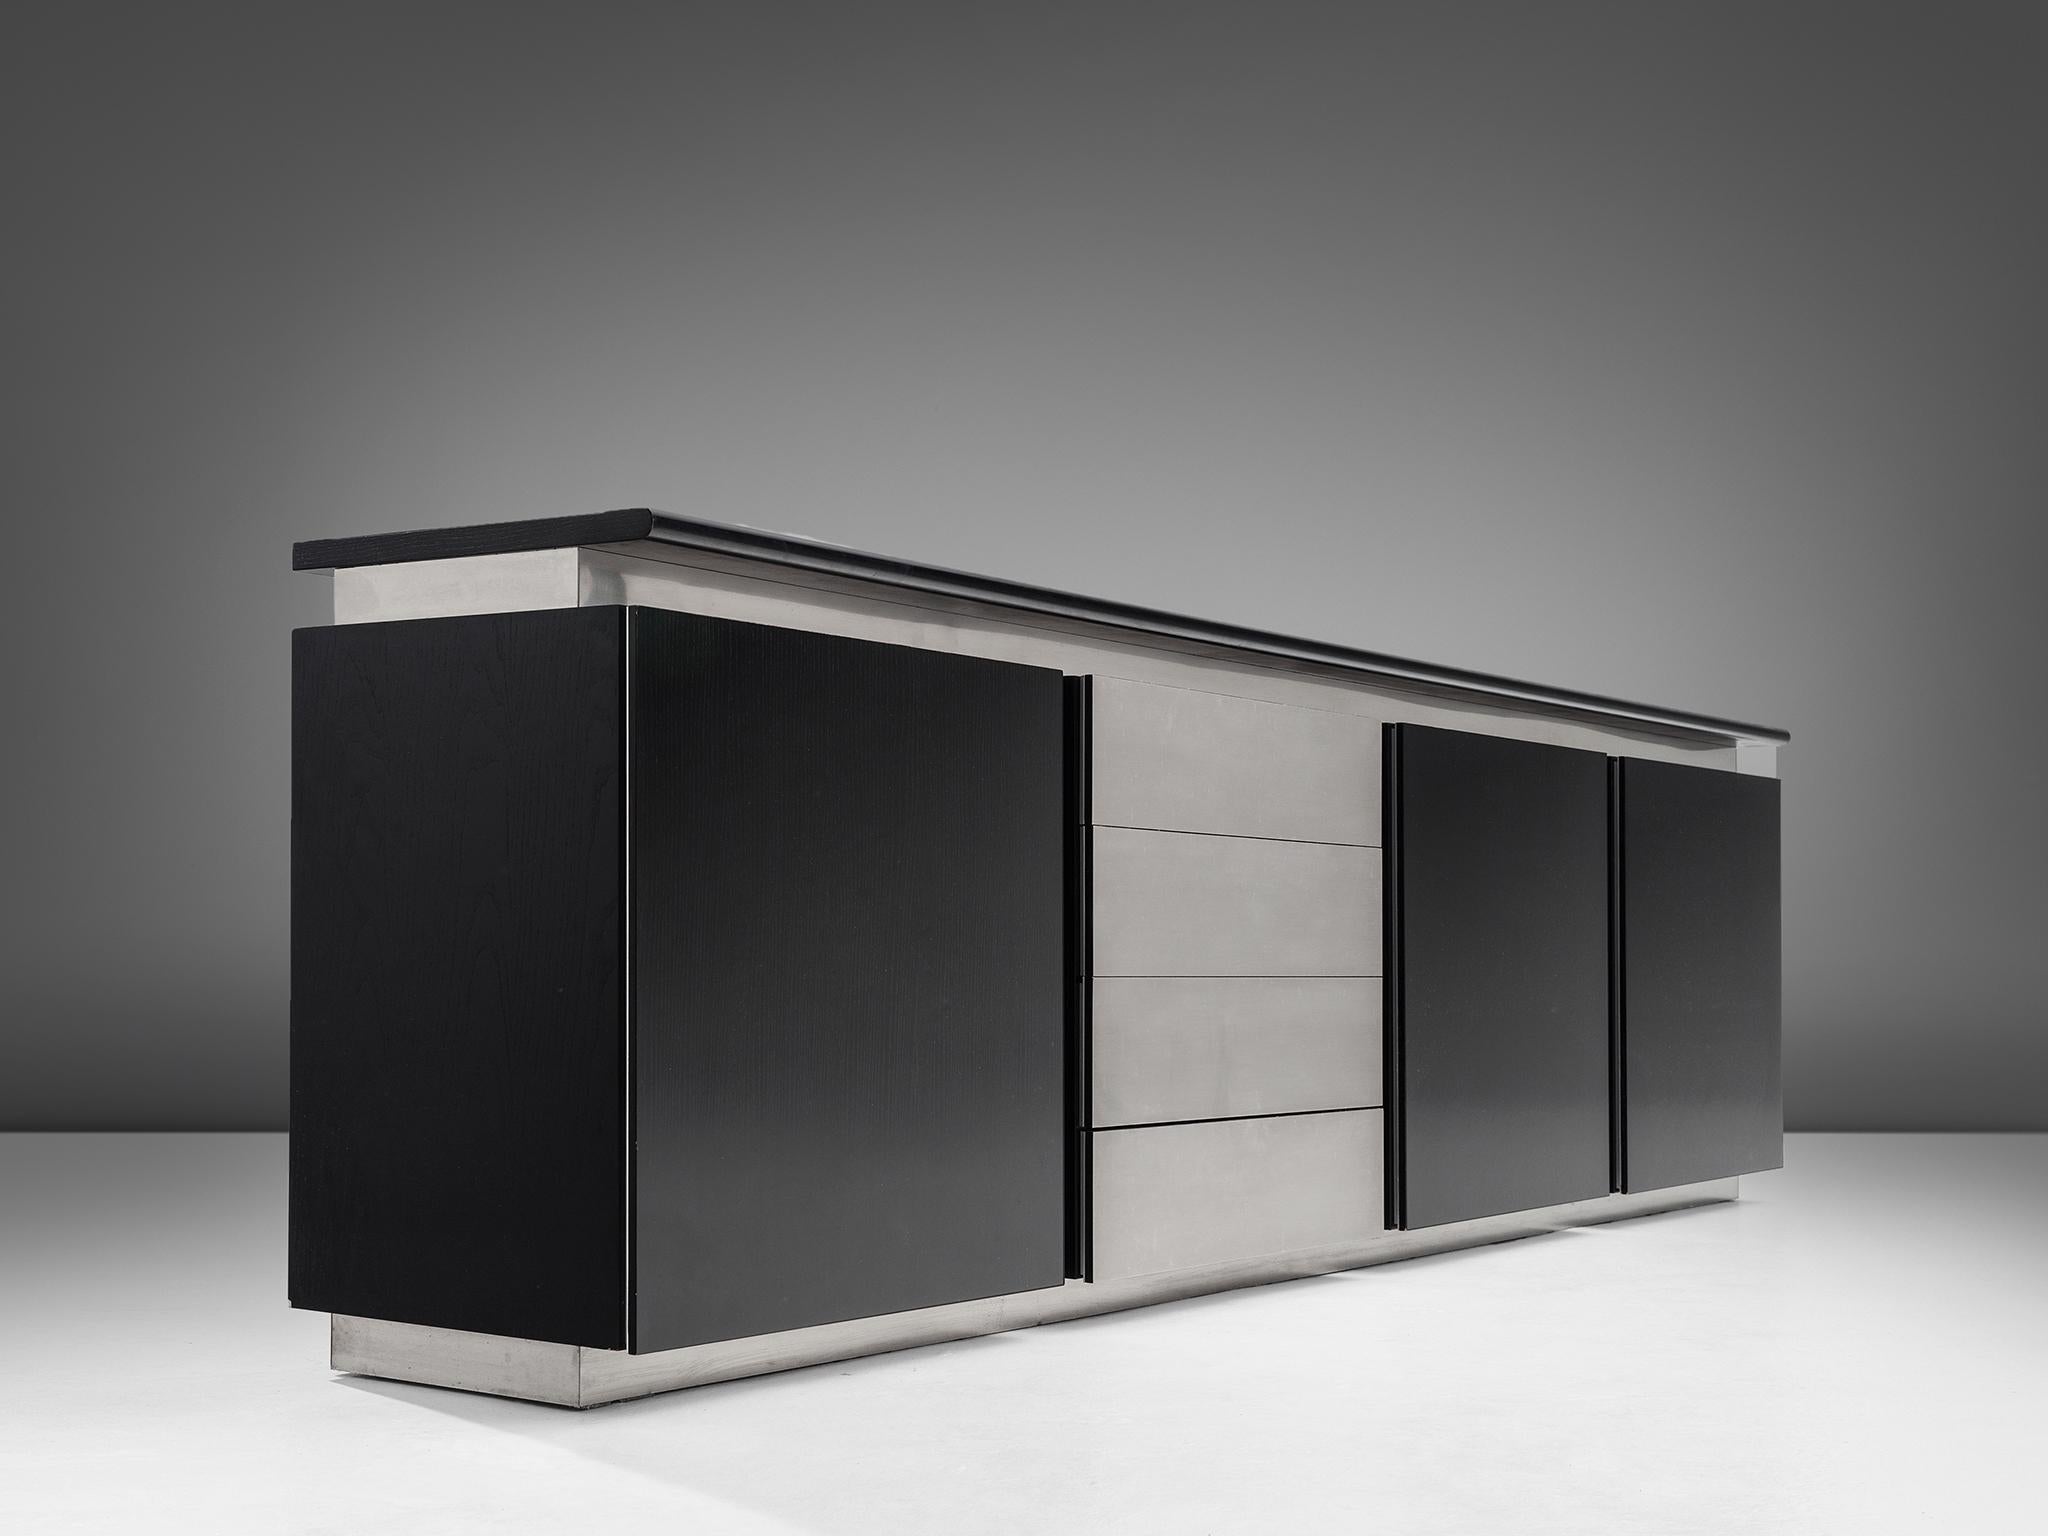 Lodovico Acerbis for Acerbis, sideboard, oak and steel, Italy, 1970s.

This elegant and modern credenza in stainless steel and stained oak is designed by Lodocivo Acerbis and part of the 'Parioli System'. Within this line of design Acerbis created